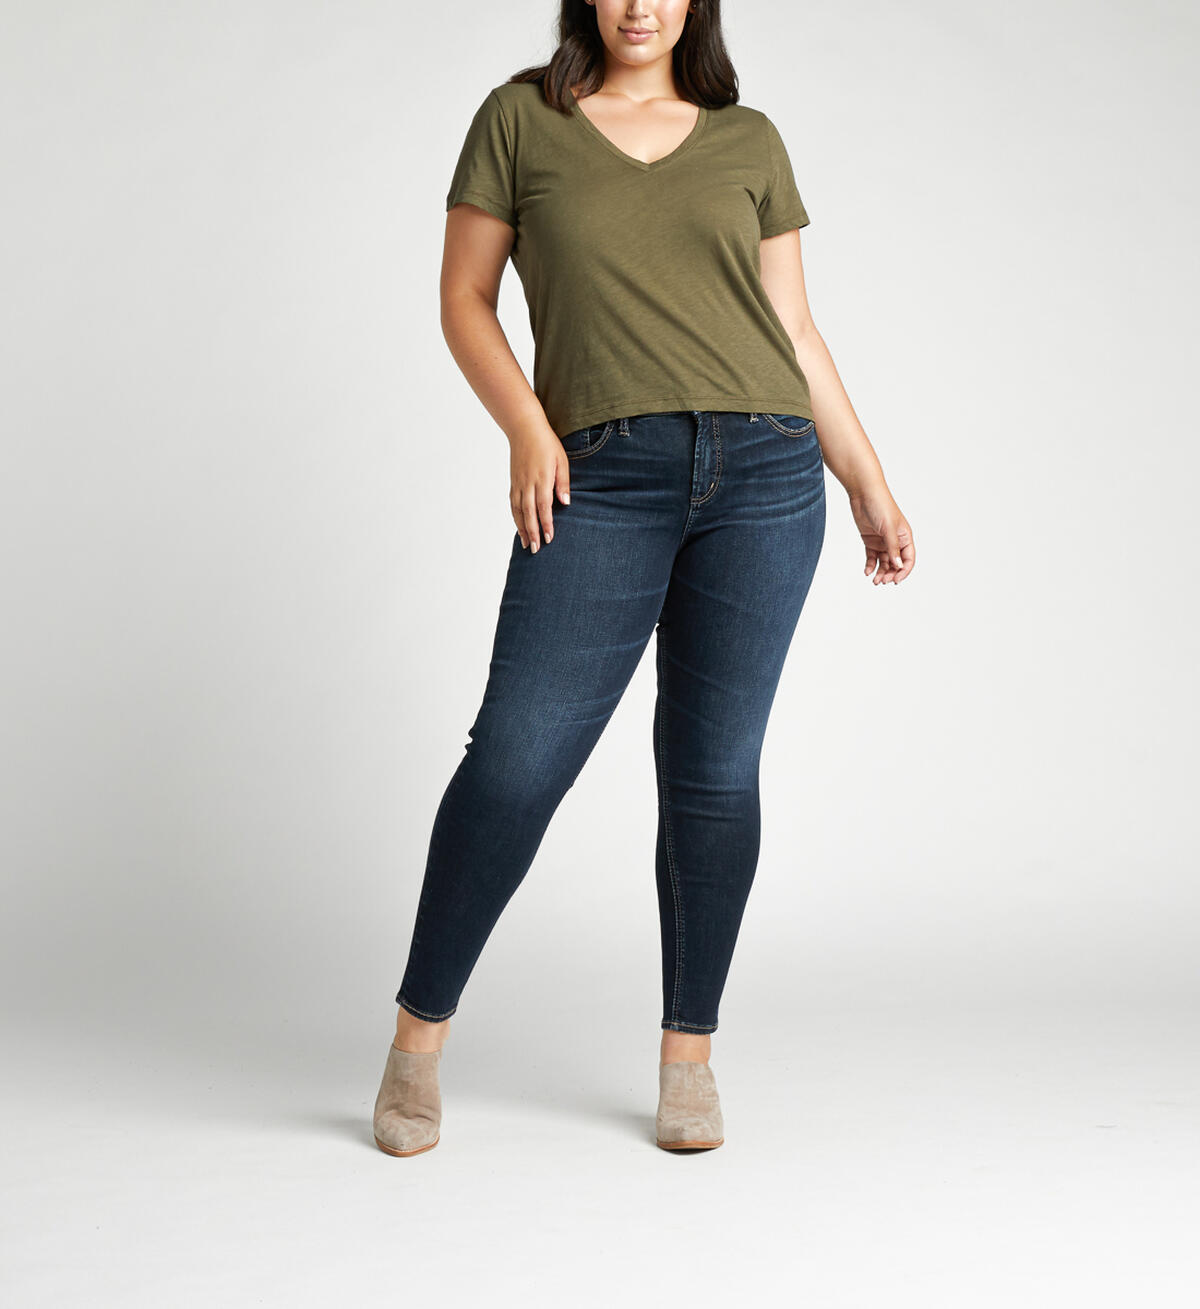 Avery High Rise Skinny Plus Size Jeans, , hi-res image number 3